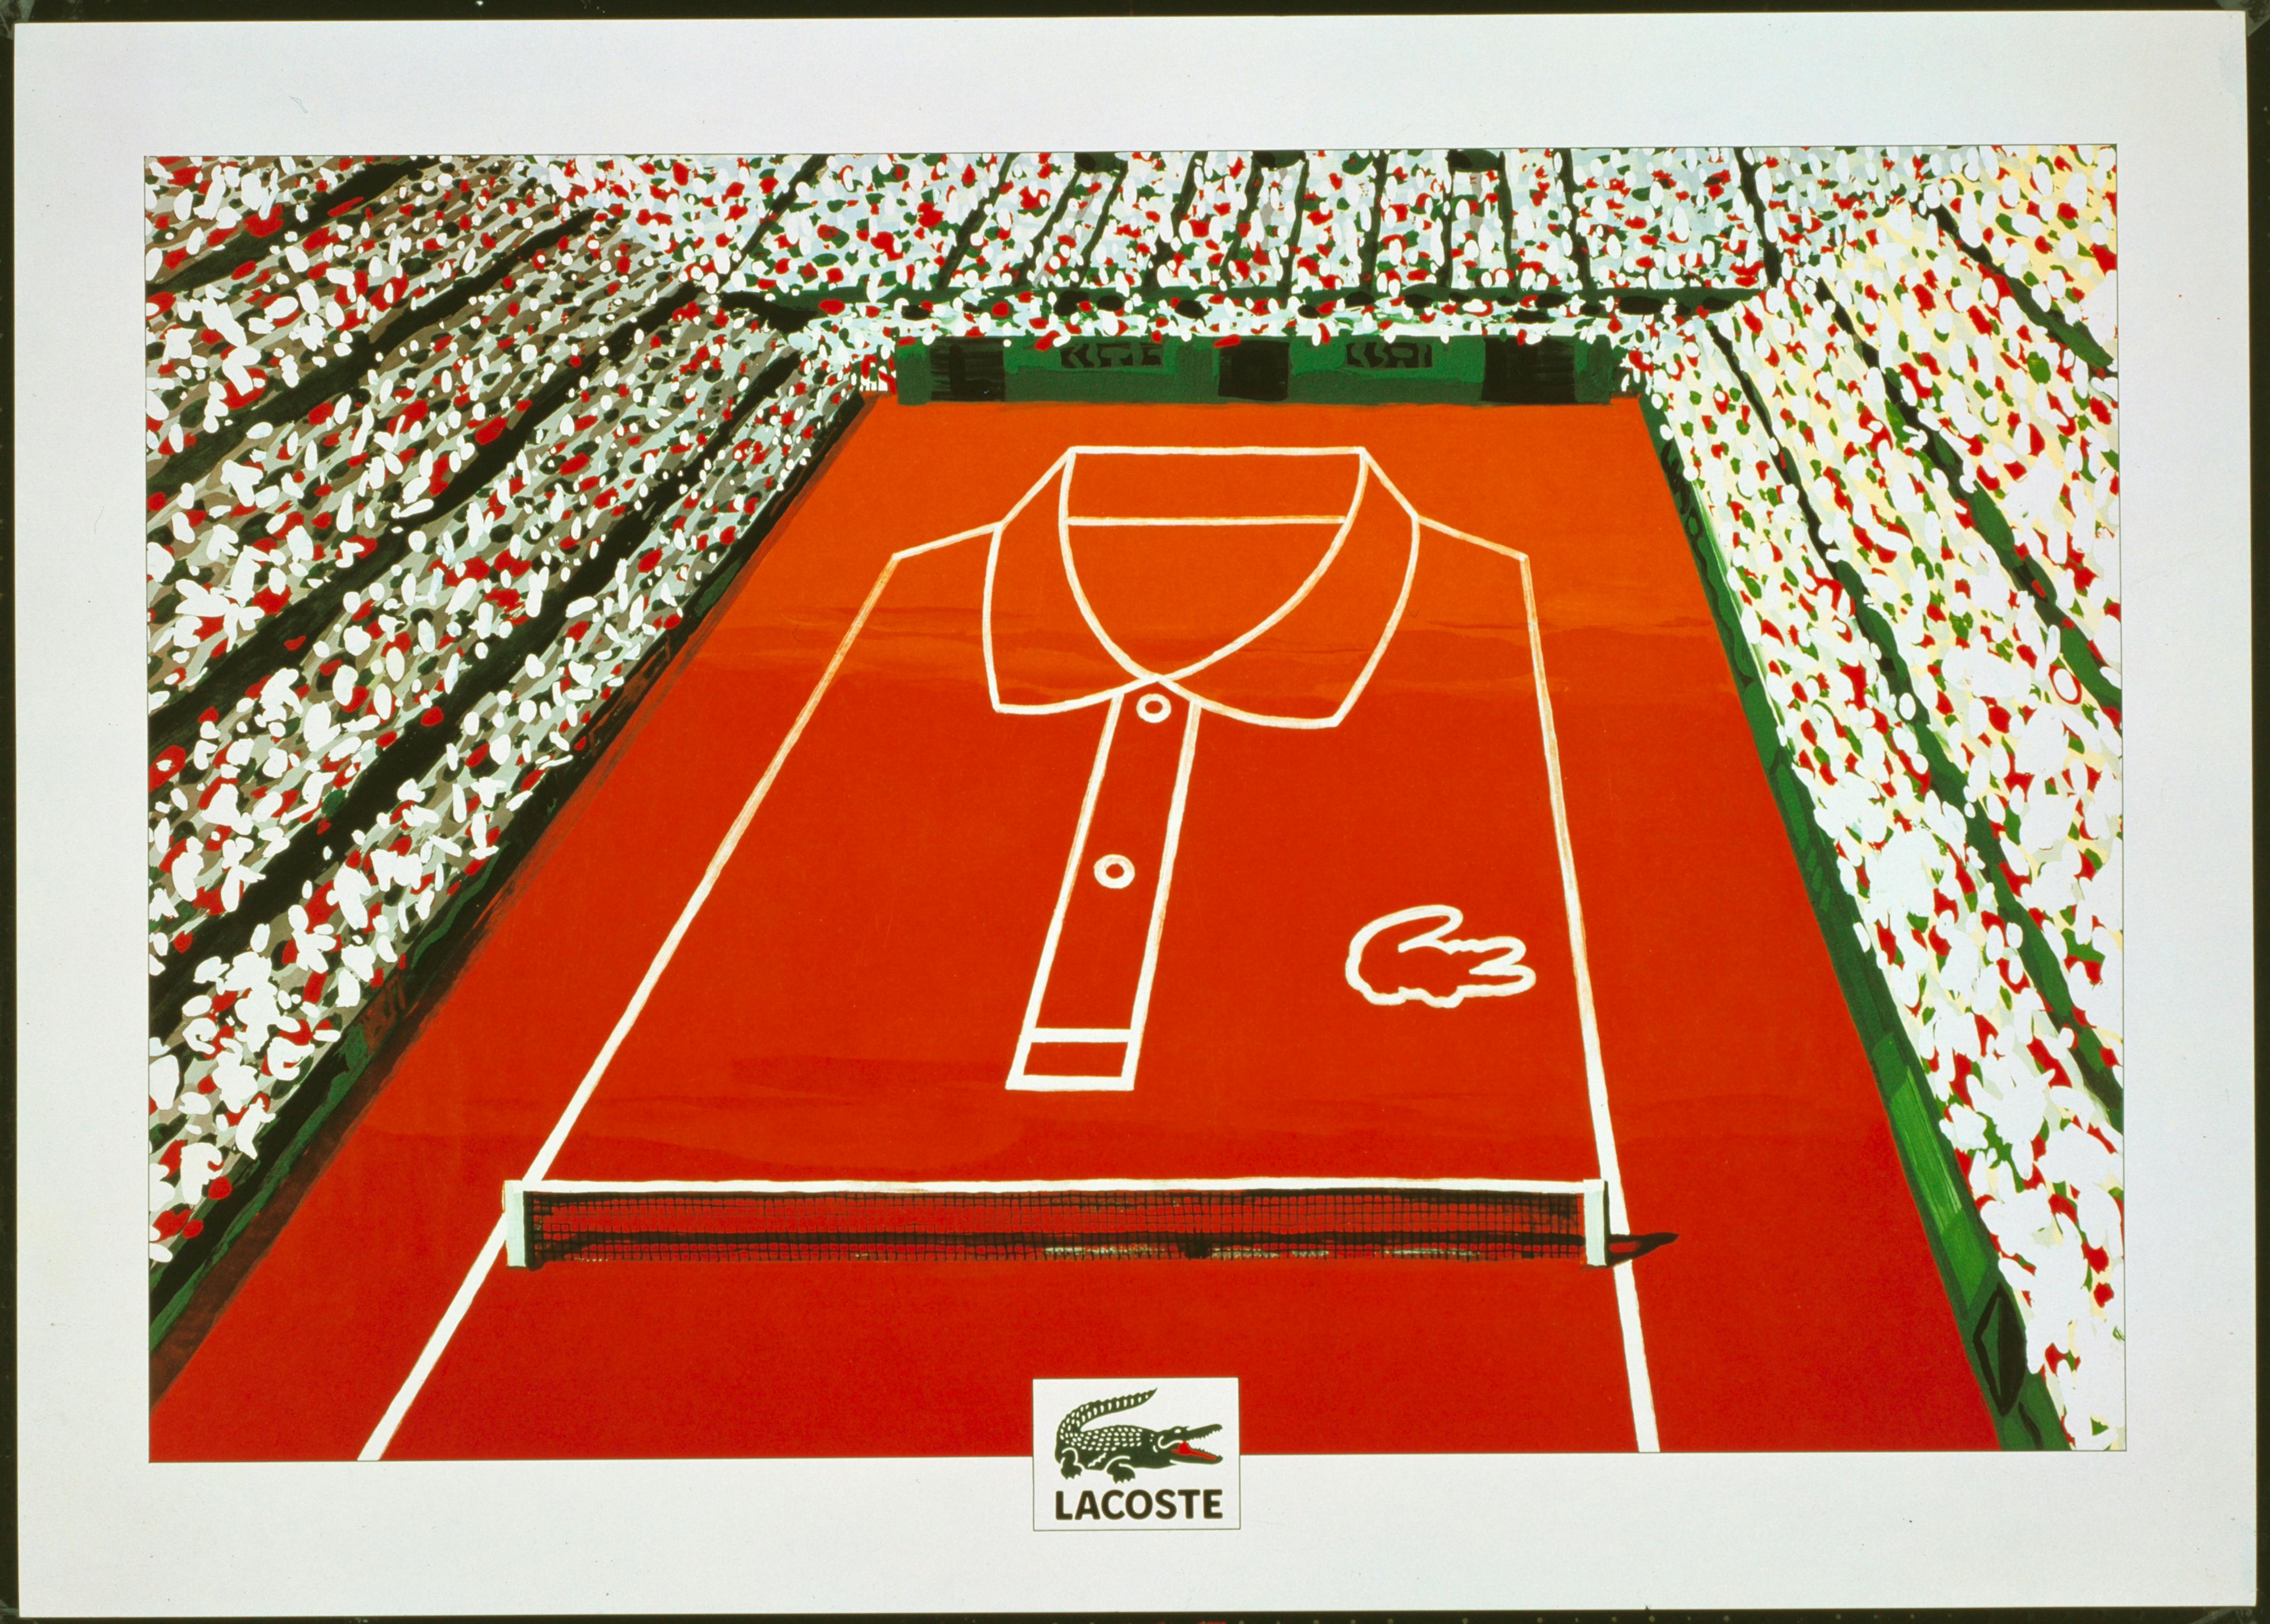 Roland Garros : 2021 French Open Pushed Back By One Week